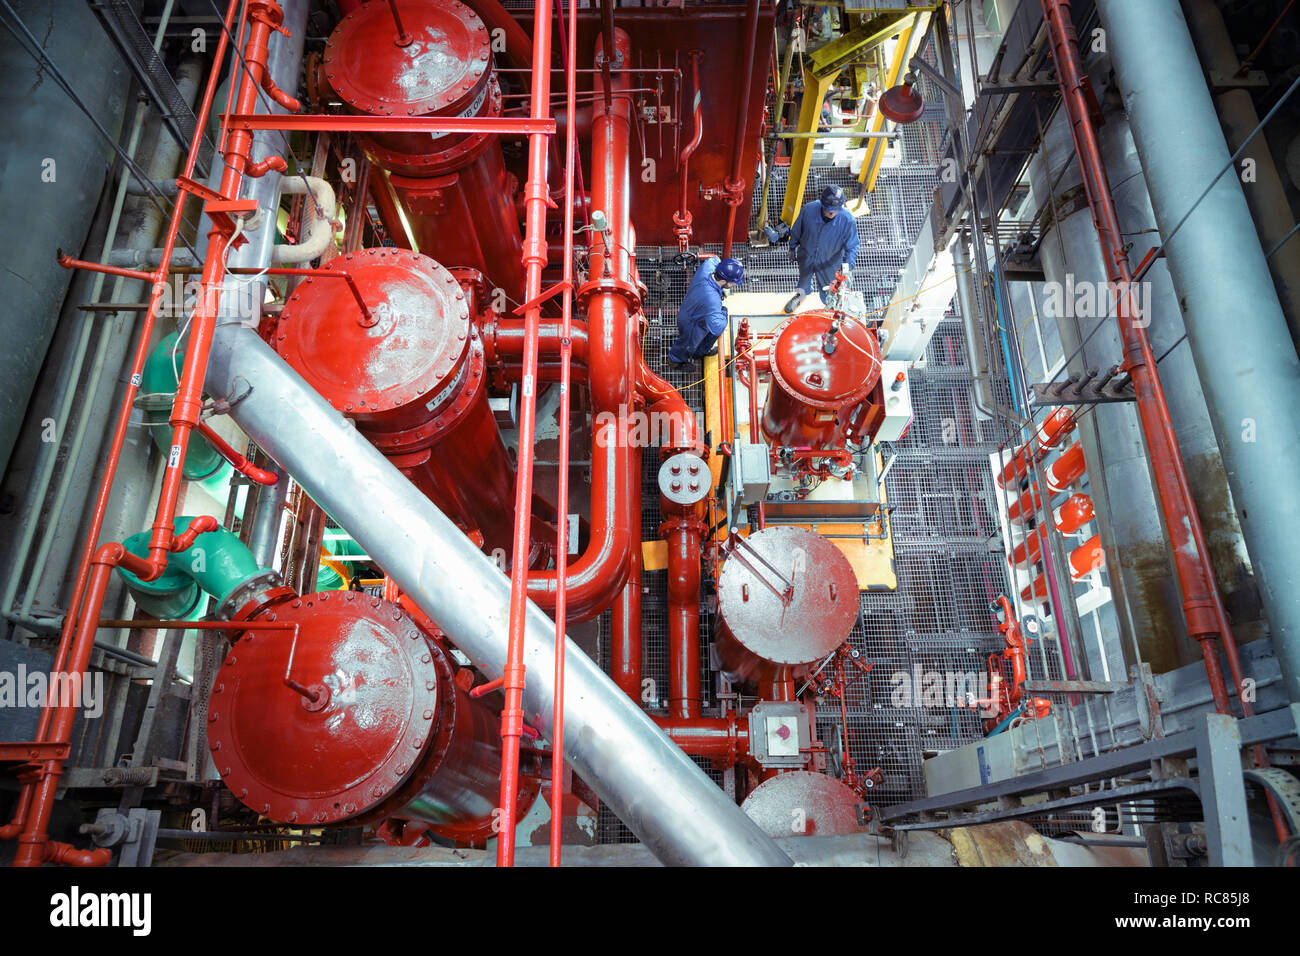 Overhead view of engineers in turbine hall of nuclear power station Stock Photo